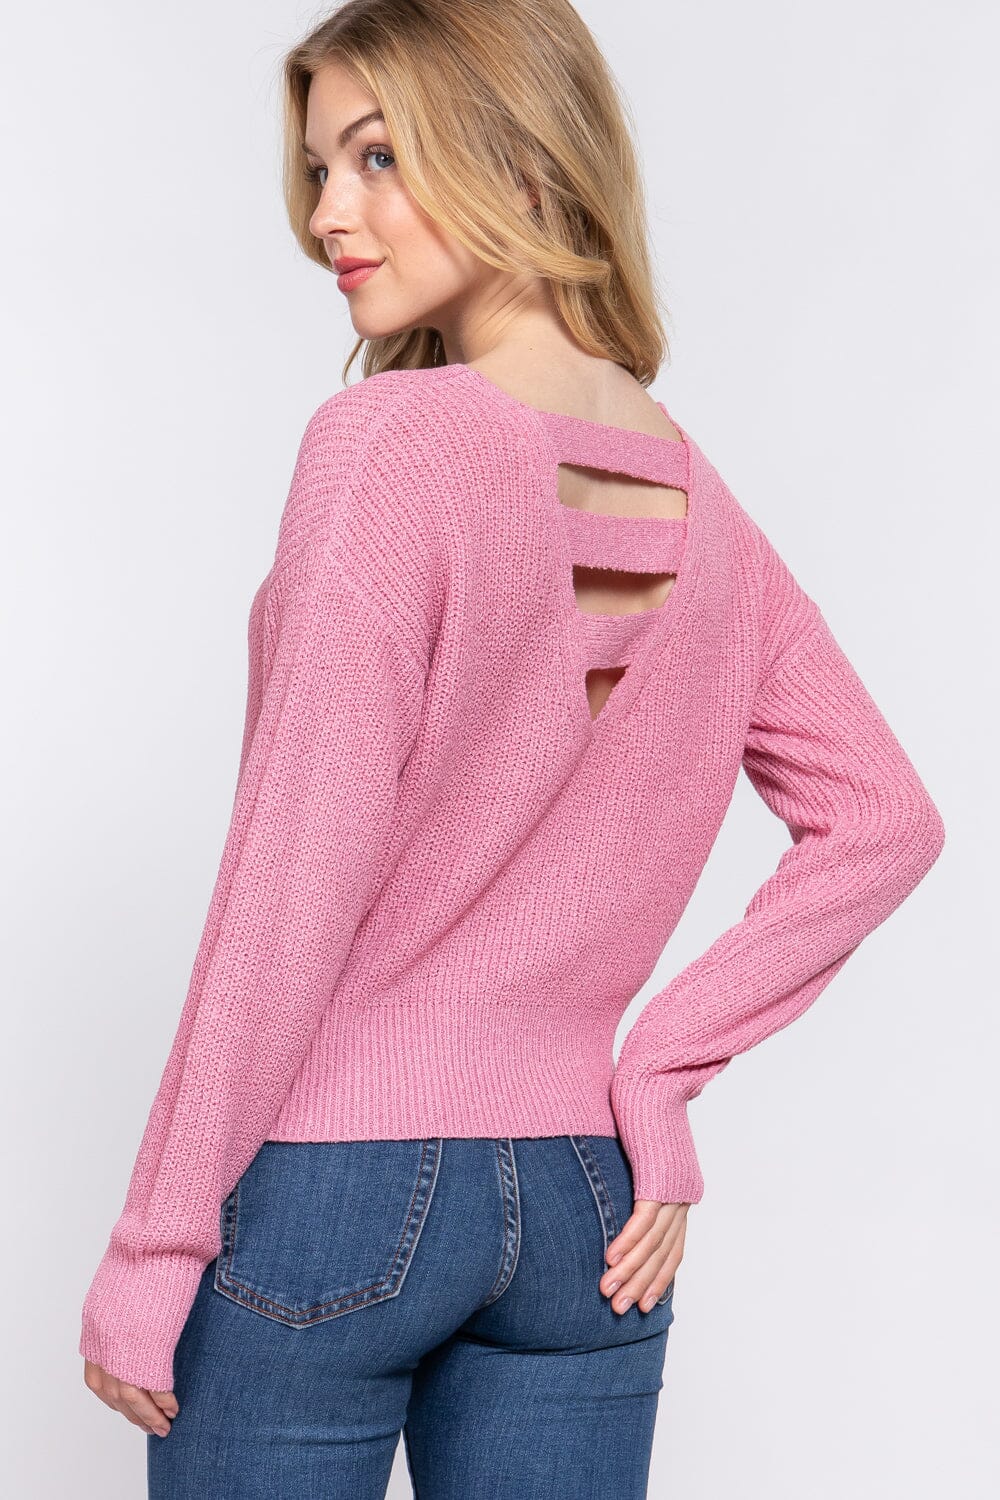 Pink Dolman Long Sleeve Strappy Open Back Sweater Top Shirts & Tops jehouze 